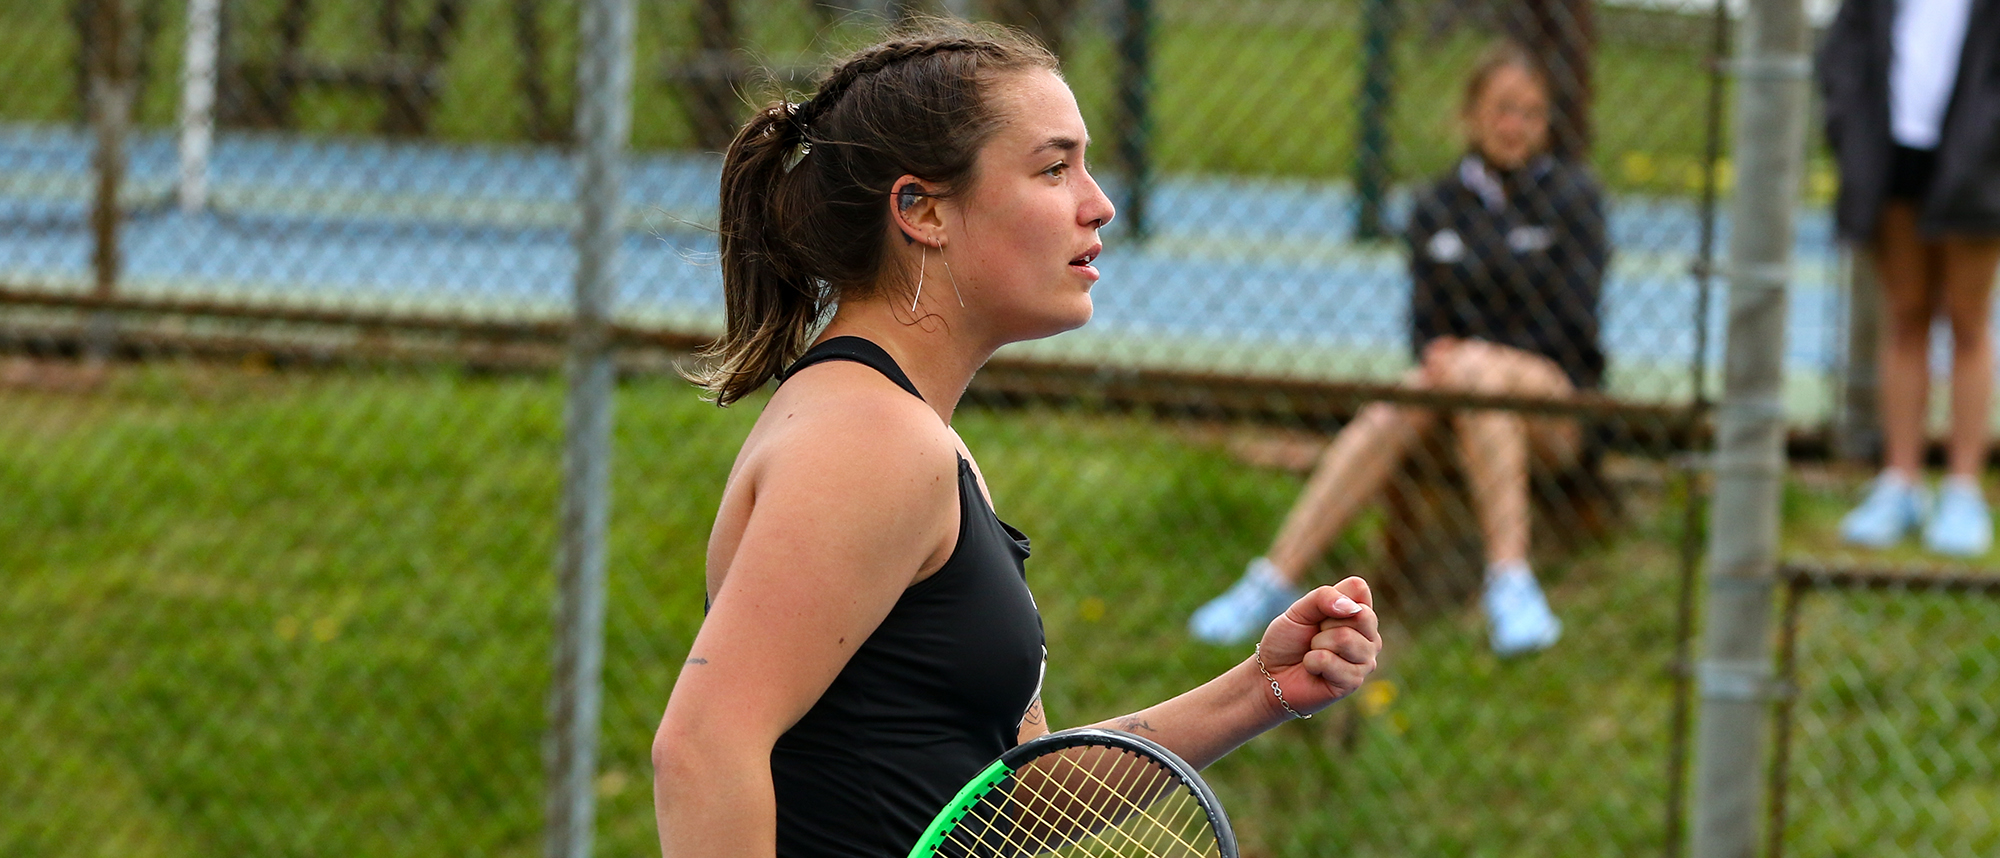 Bryant will serve as No. 4 seed at NEC Championships